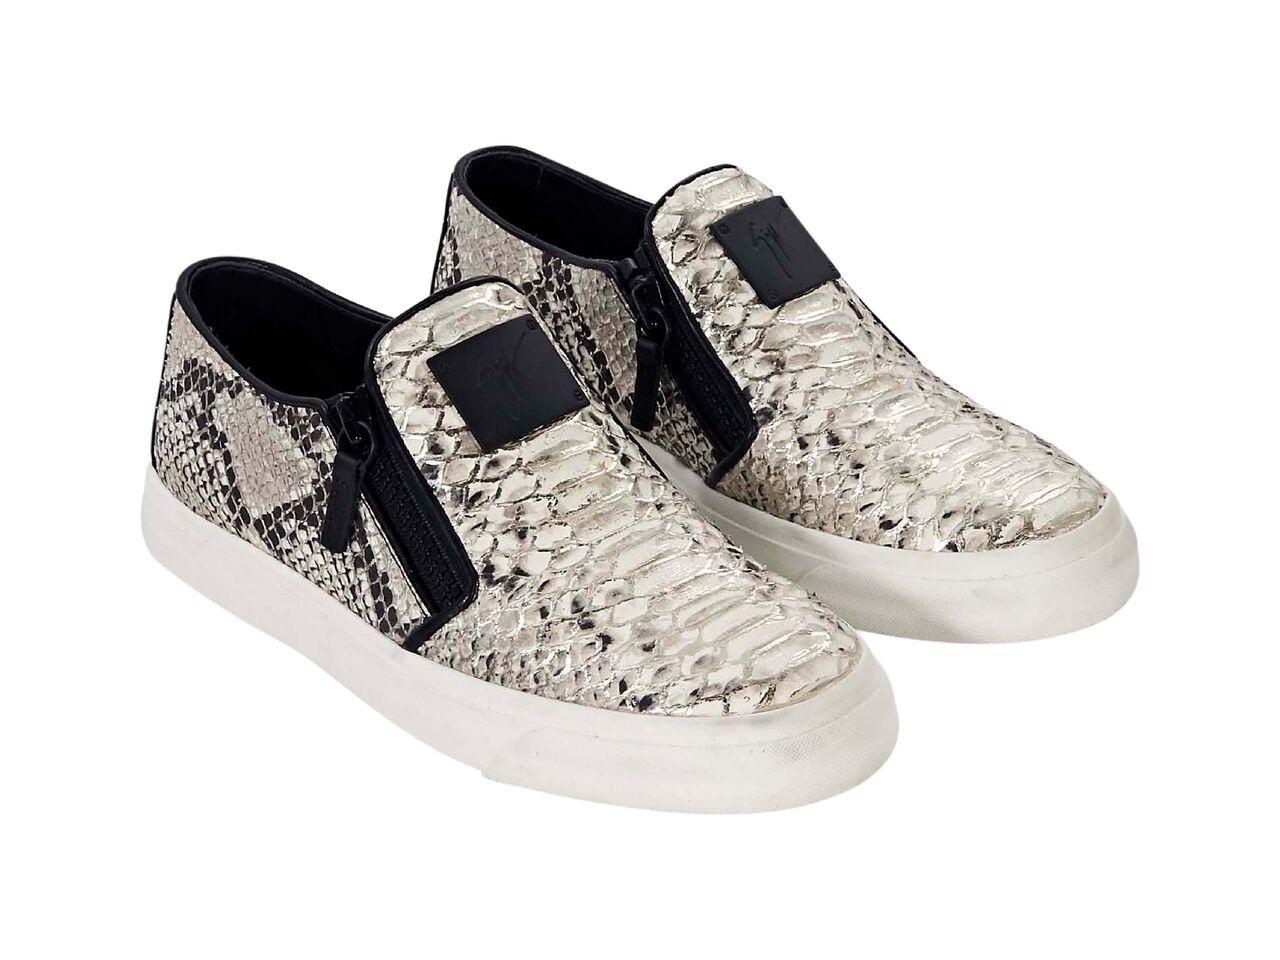 Product details:  Multicolor metallic snakeskin embossed sneakers by Giuseppe Zanotti.  Trimmed with black patent leather.  Zipper placket accents.  Round toe.  Slip-on style. 
Condition: Pre-owned. Very good. 
Est. Retail $ 995.00